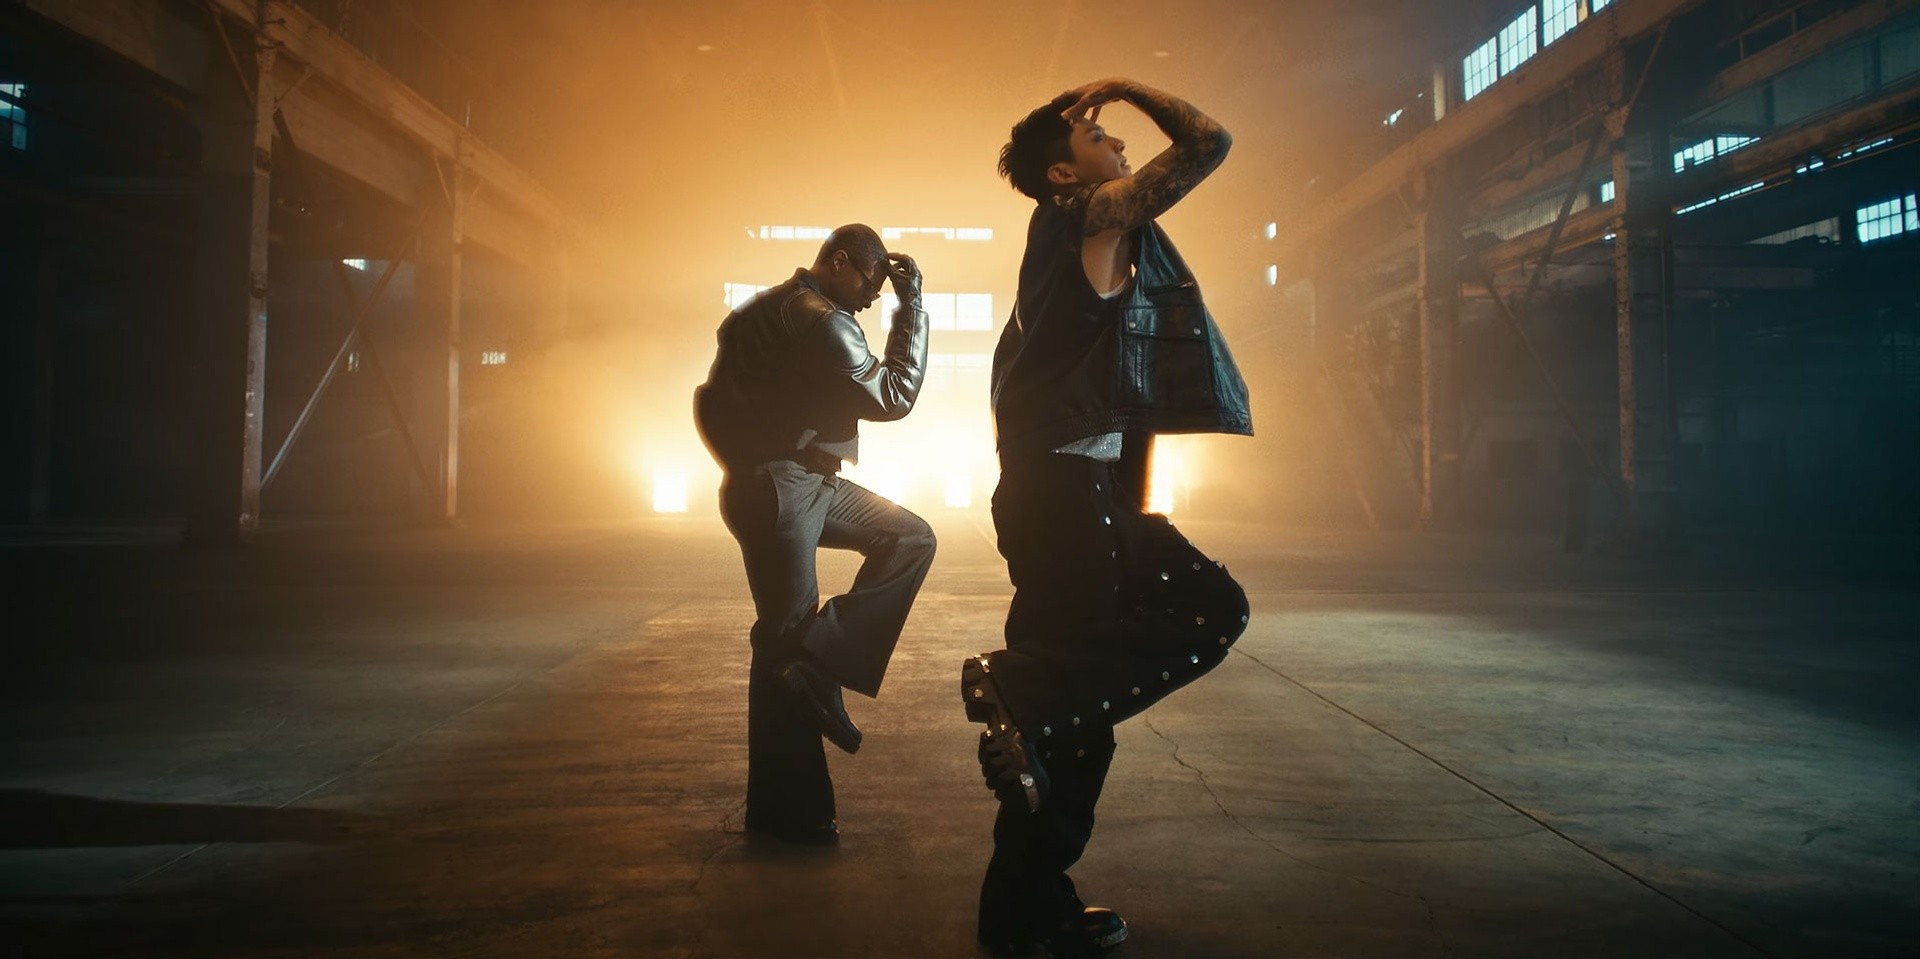 Jungkook and Usher unveil 'Standing Next to You (Usher Remix)' performance video – watch